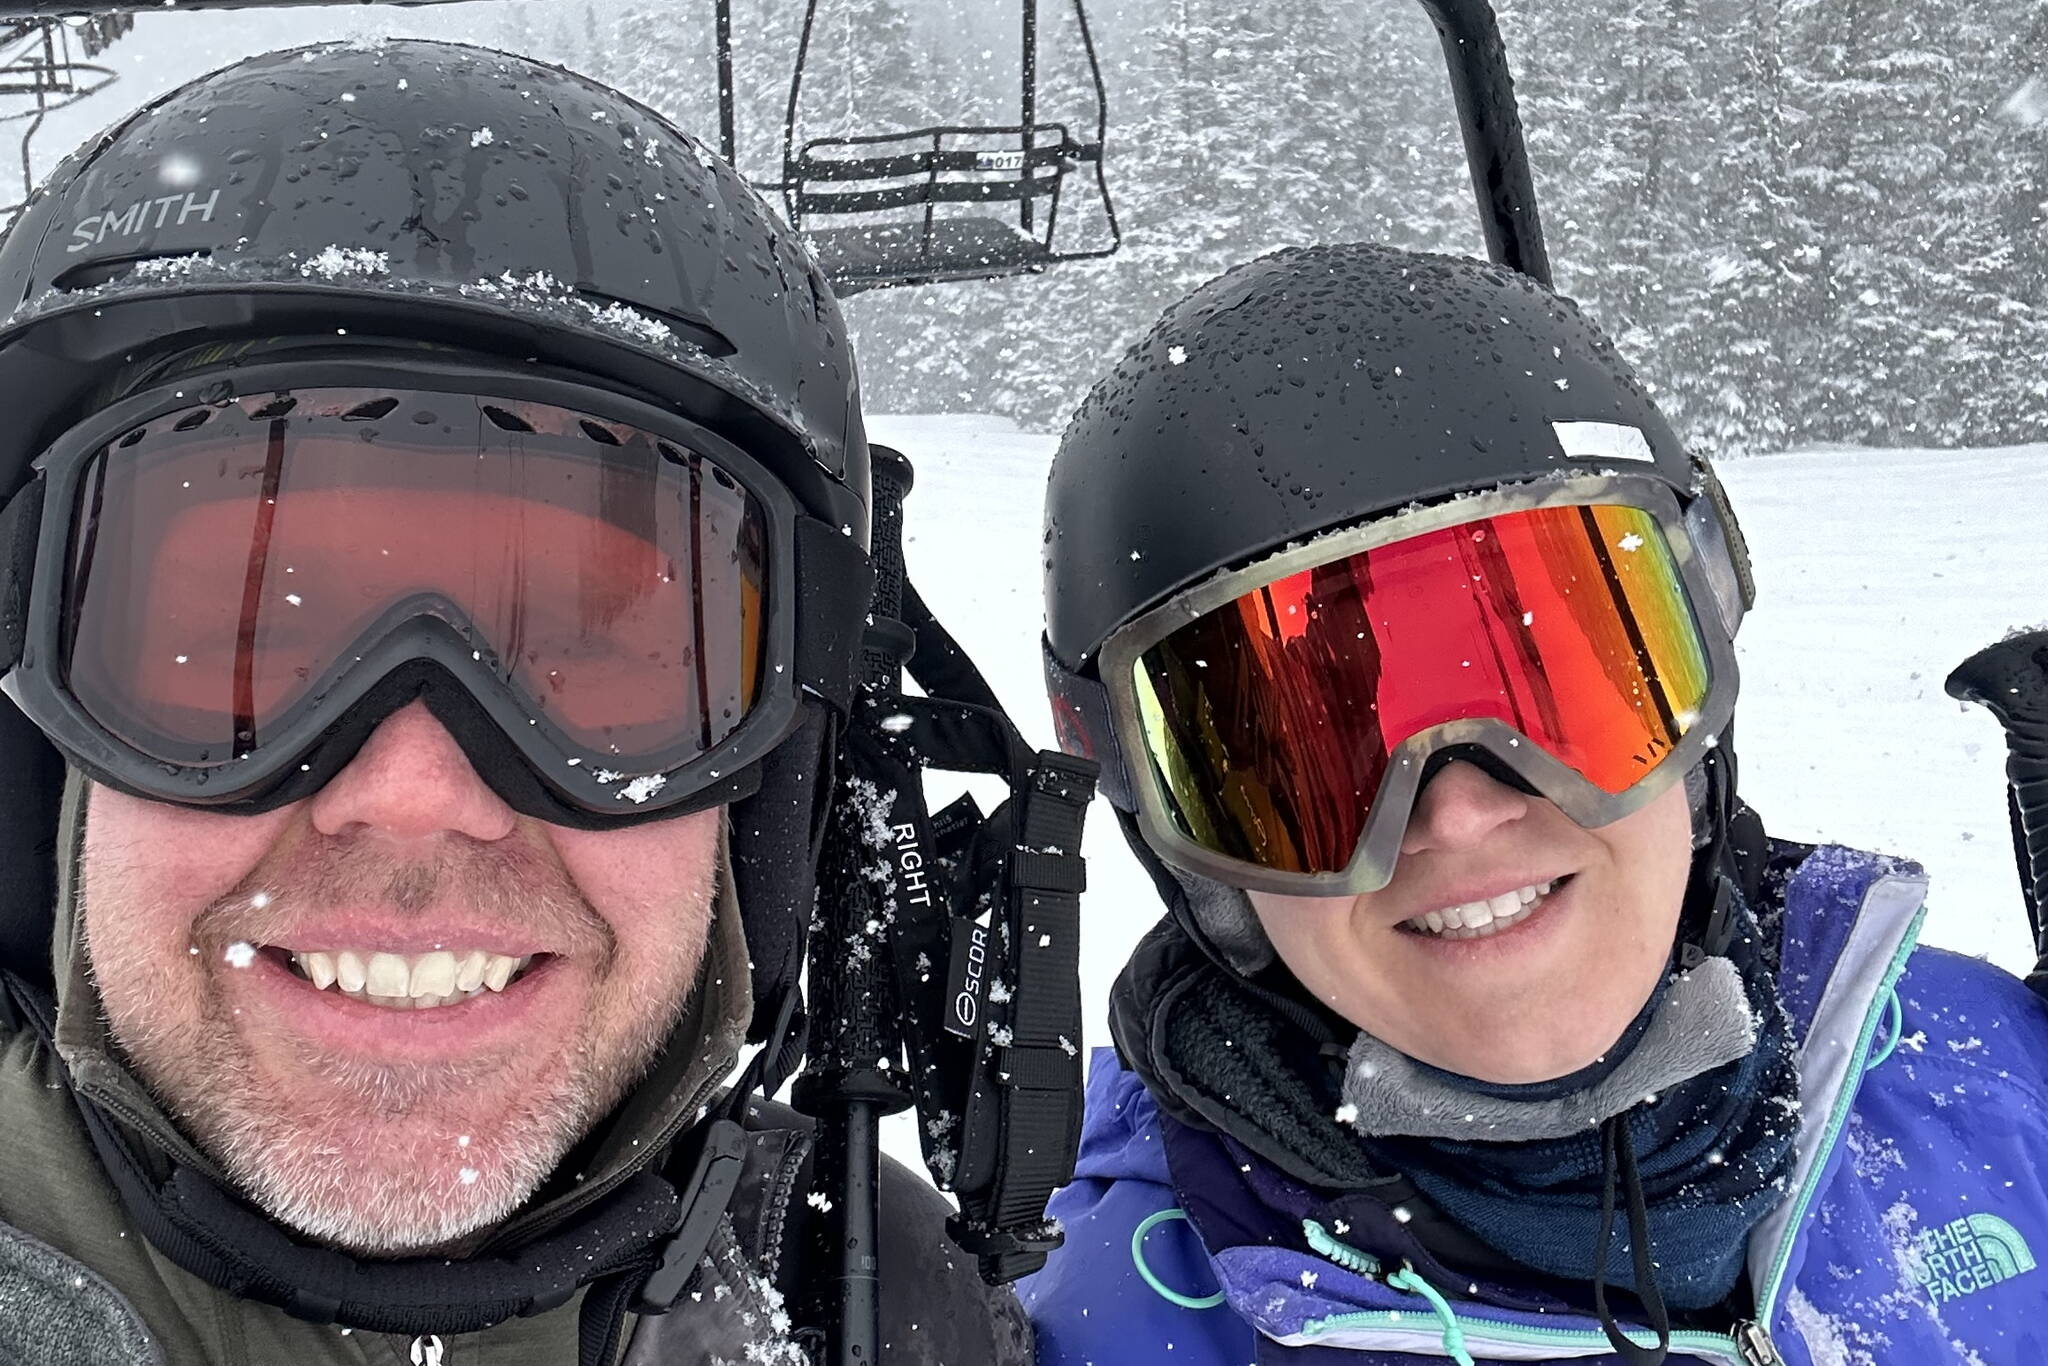 The author and his wife ride a lift at Eaglecrest over the weekend. (Photo by Jeff Lund)